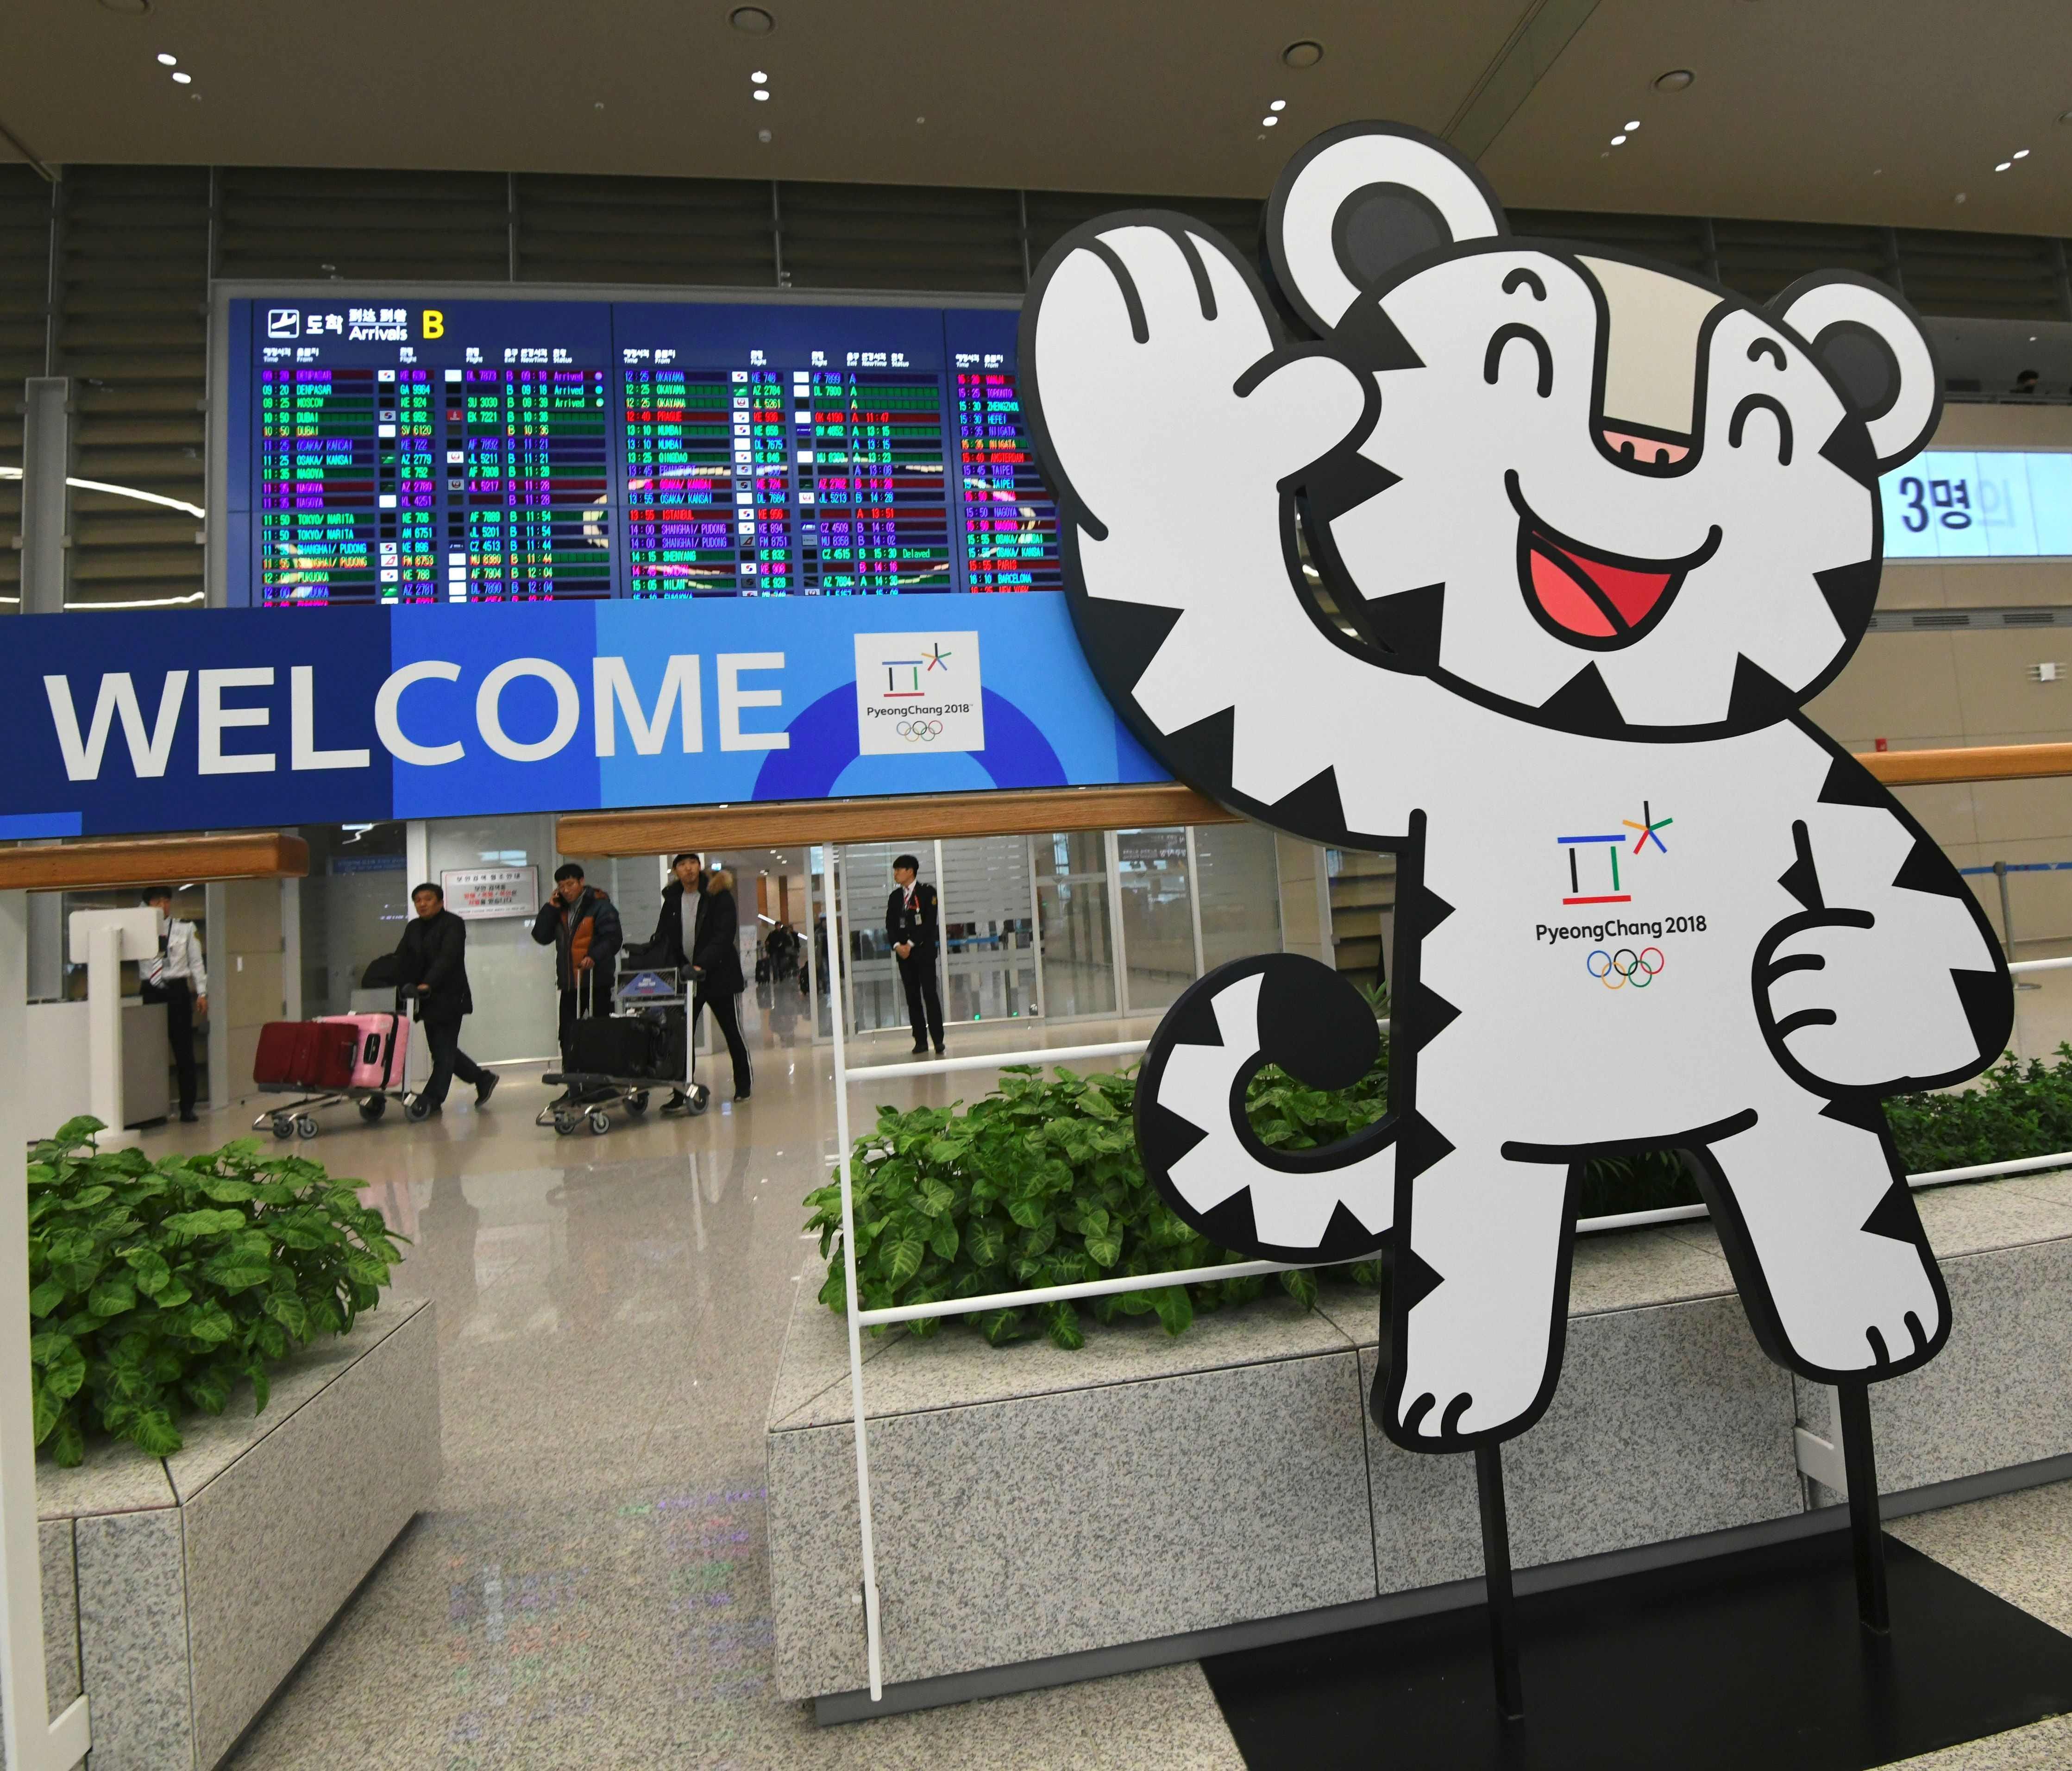 The mascot of the 2018 PyeongChang Winter Olympics is set at the arrival gate of Terminal 2 of Incheon International Airport on Jan. 18, 2018.